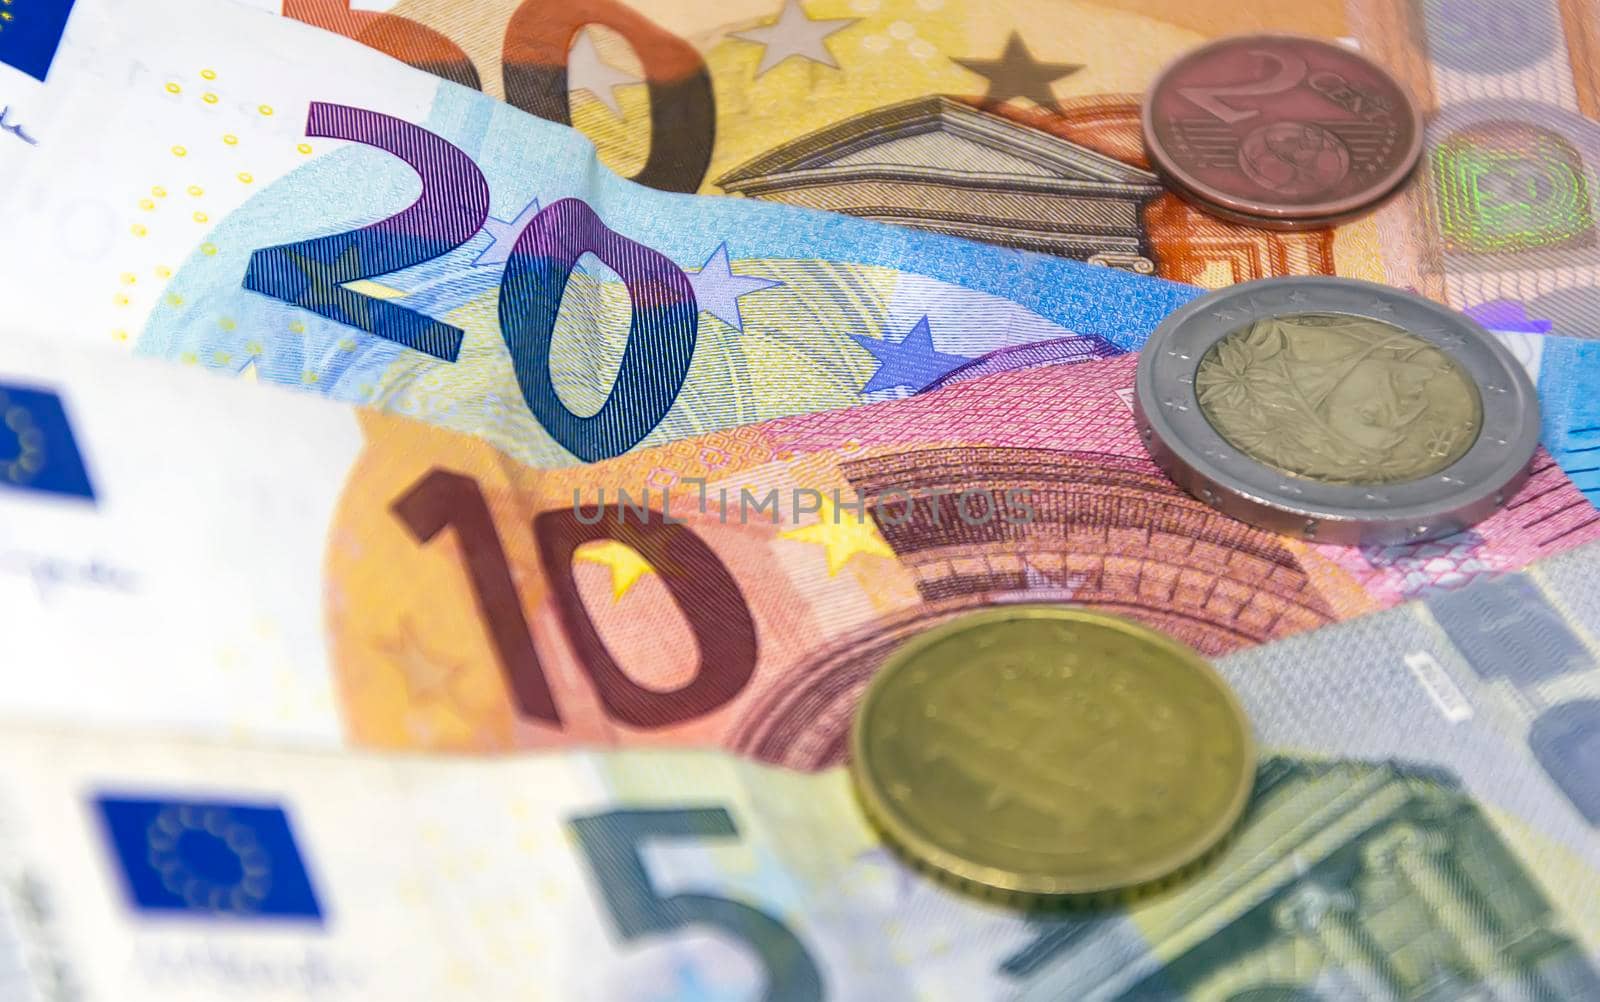 European Union coins and banknotes of different values. The euro is the European currency. Finance, economy and business. Cash and savings